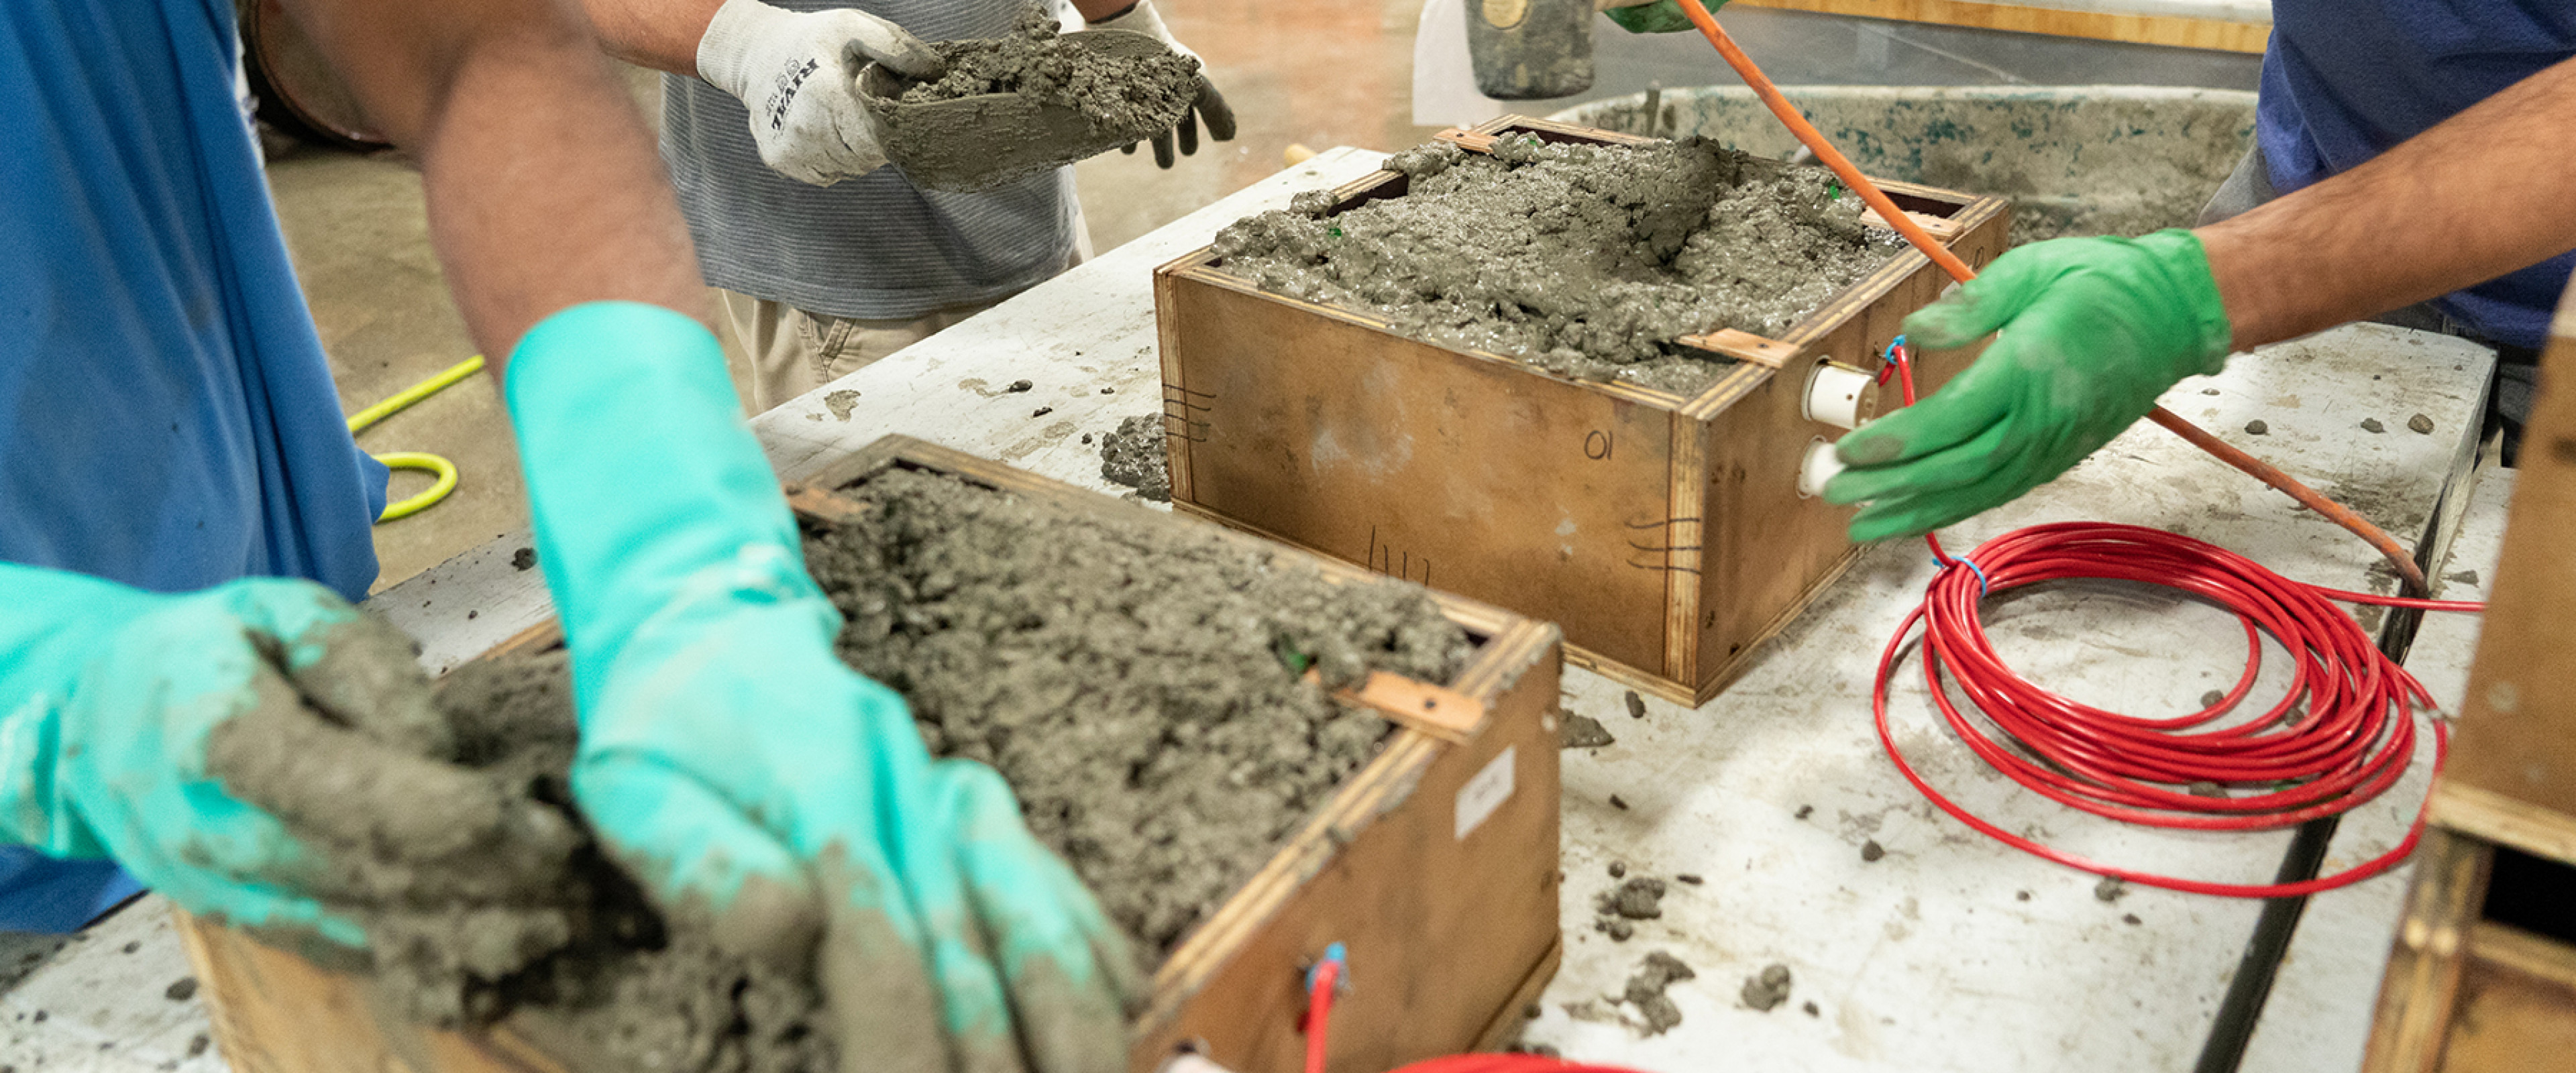 students testing concrete in one of the labs